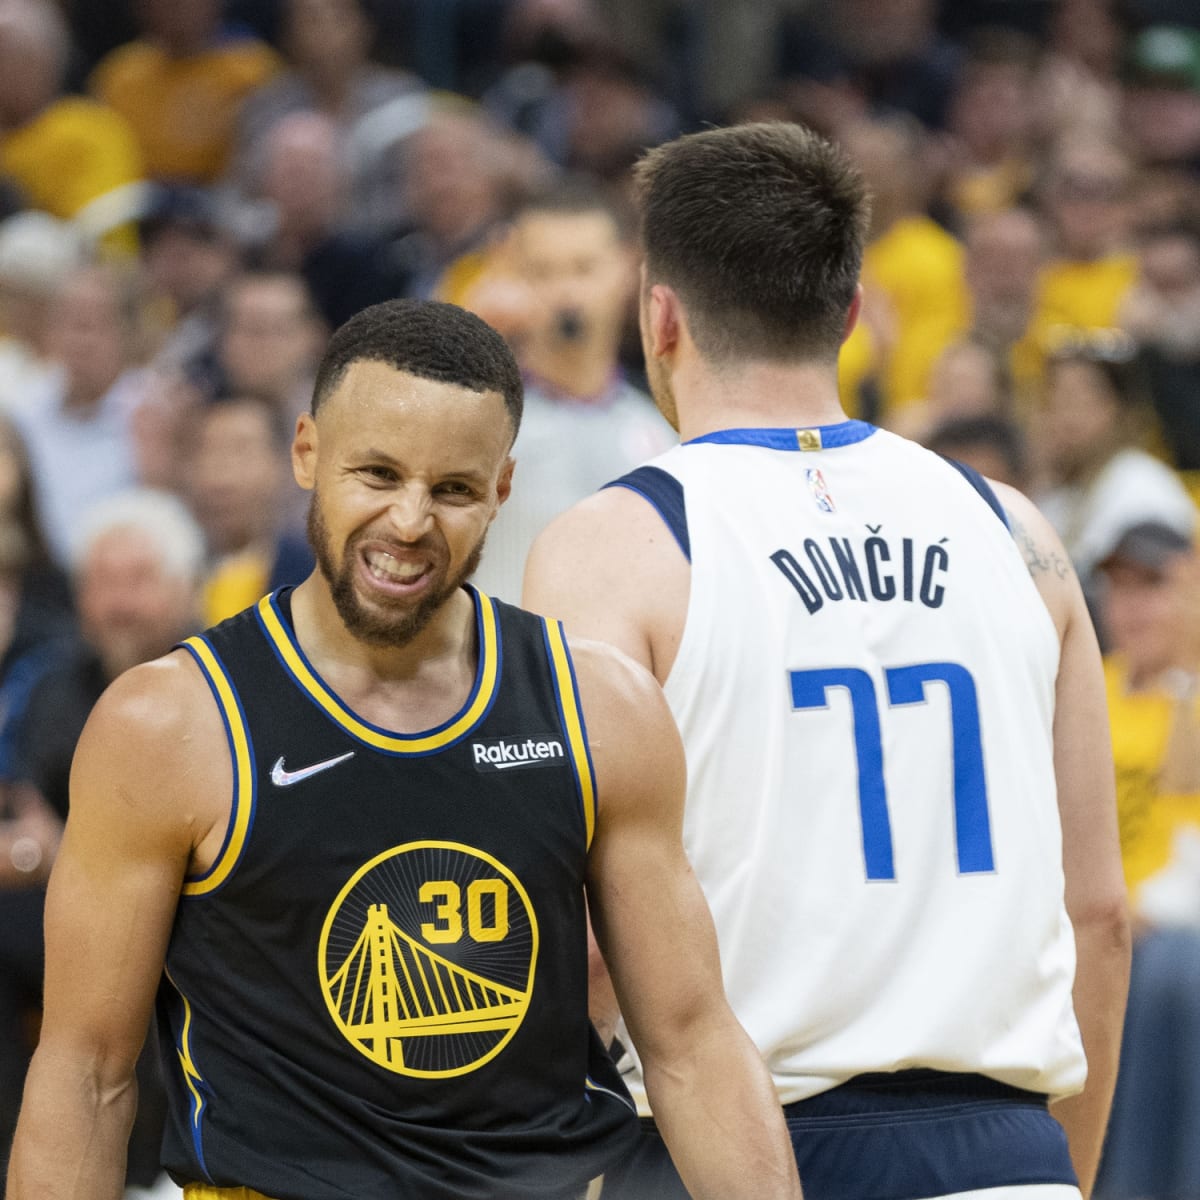 Dallas Mavericks vs Golden State Warriors: Injury Reports, Starting 5s,  Betting Odds, Tips & Spreads - May 20th, 2022